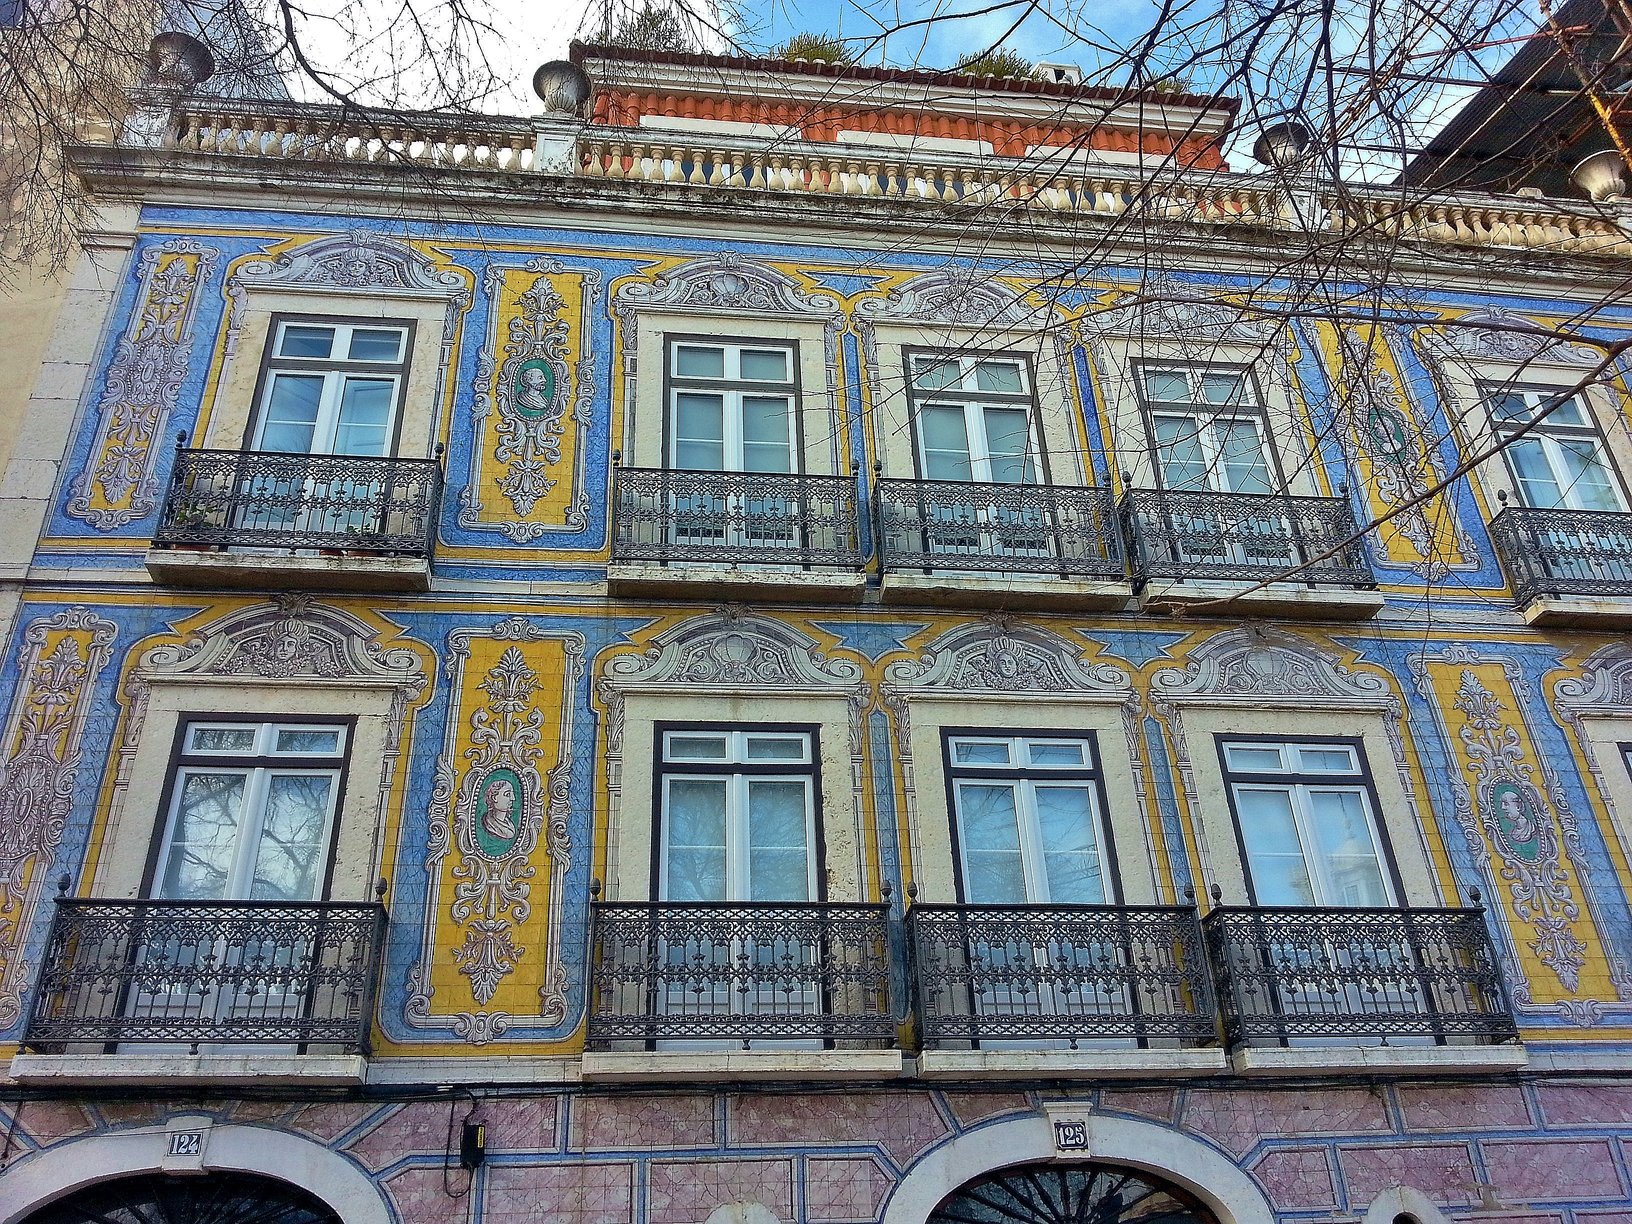 Colourful buildings and wall murals in Lisbon - 12 reasons to love Lisbon